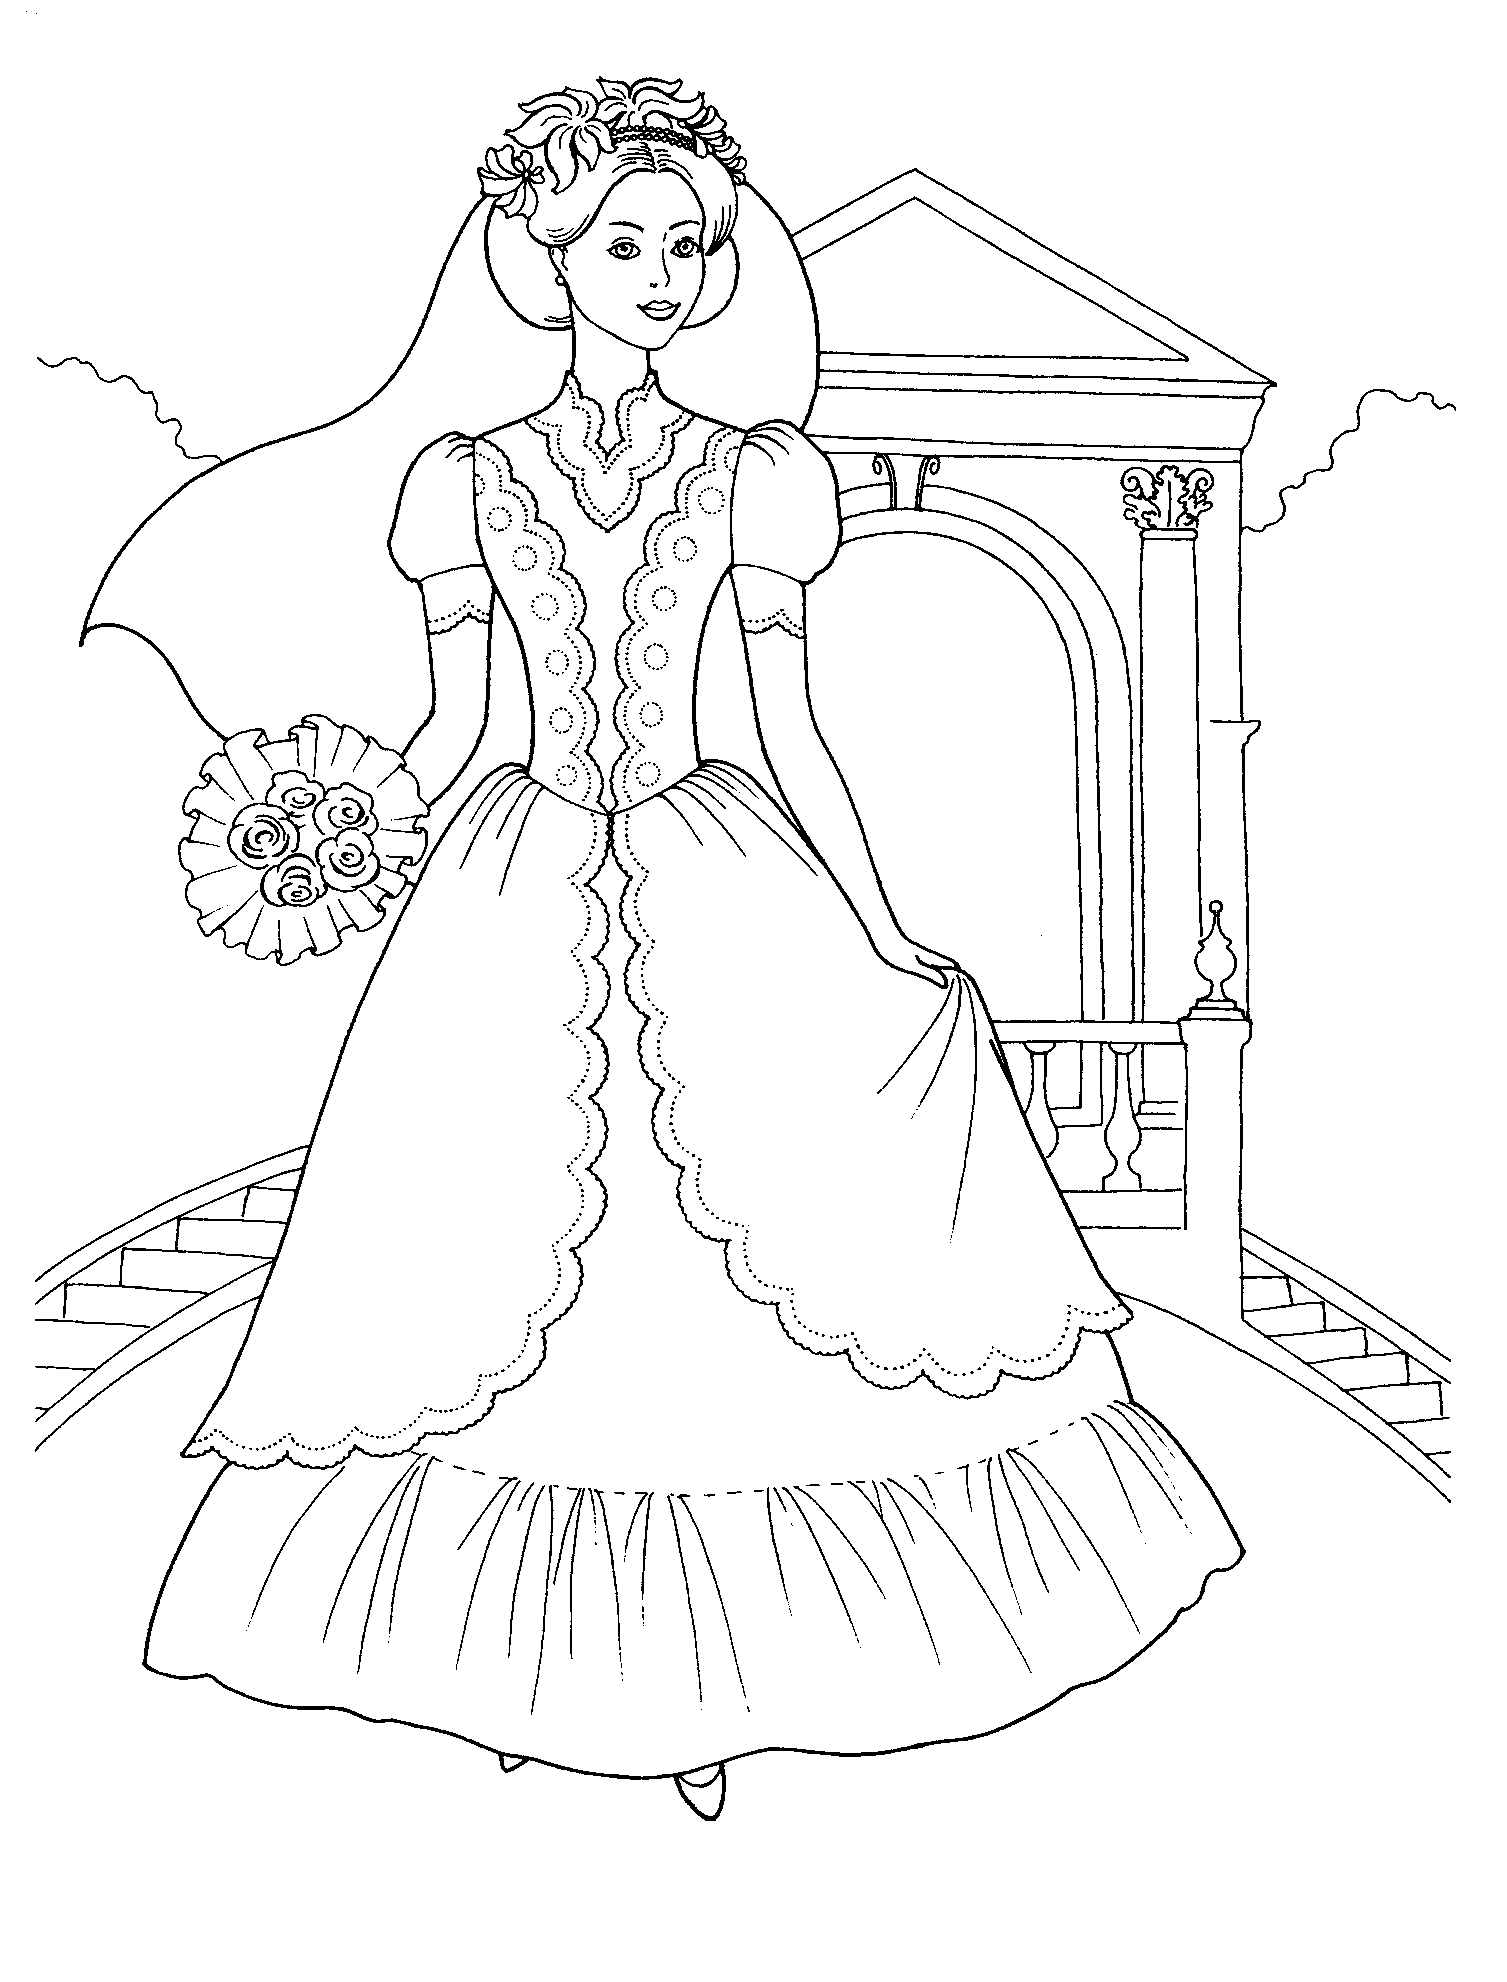 The most beautiful bride Coloring Pages to download and print for free